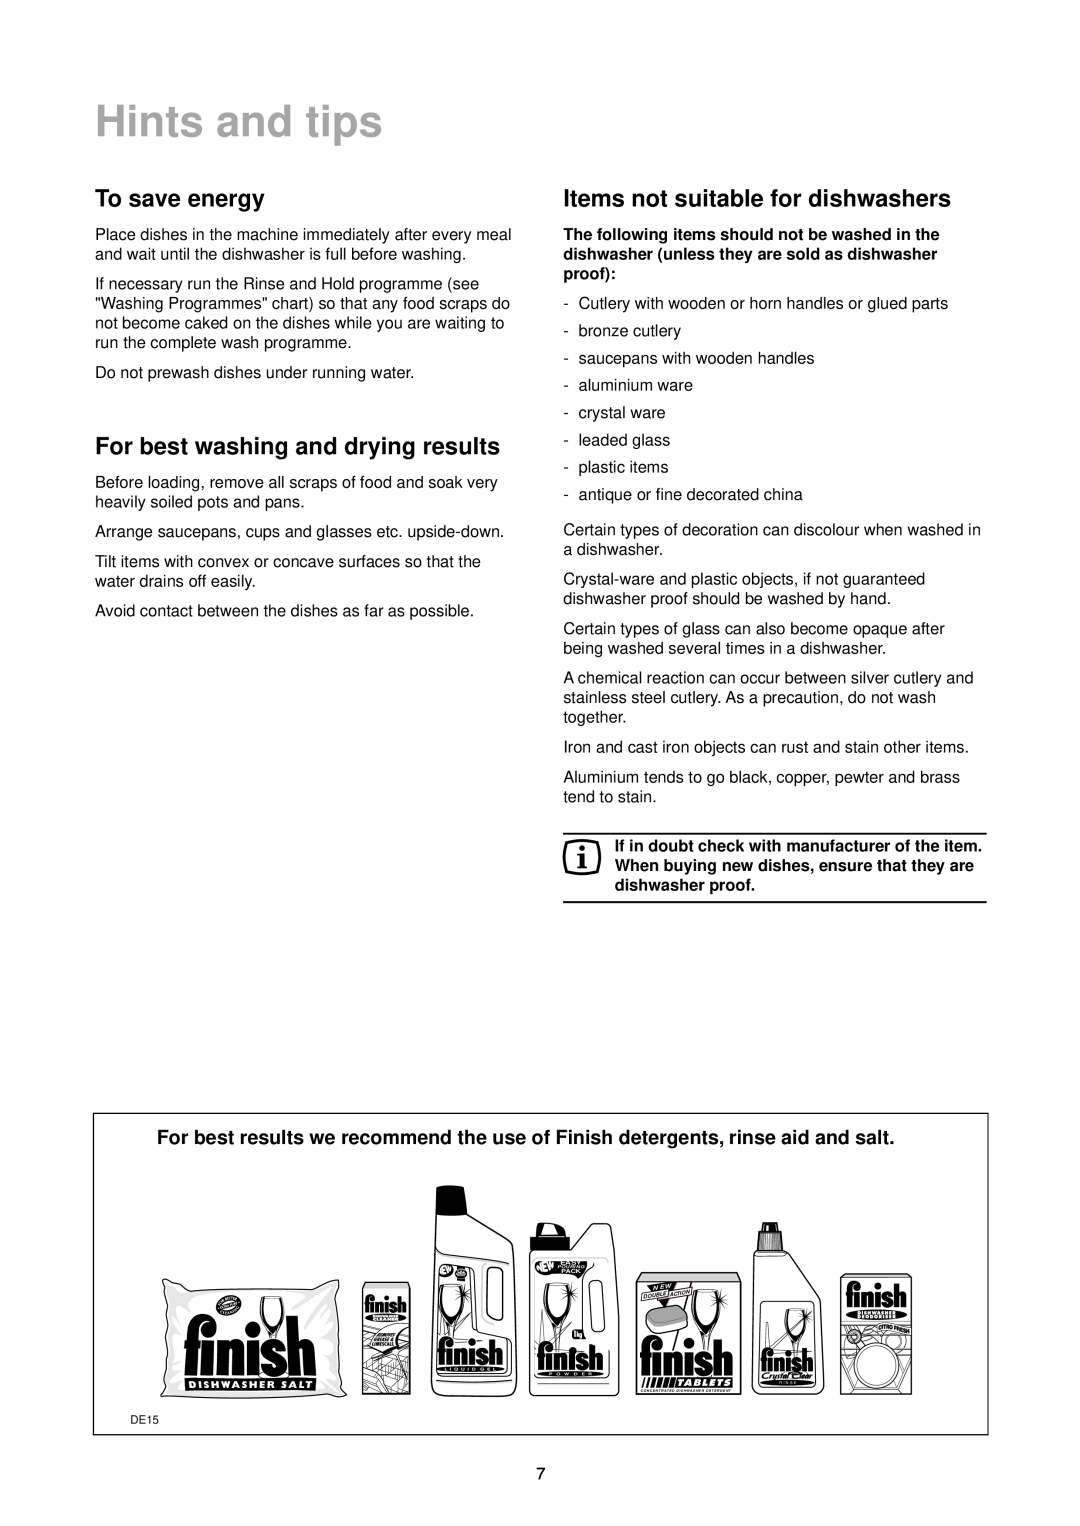 Tricity Bendix BDW 53 manual Hints and tips, To save energy, For best washing and drying results 